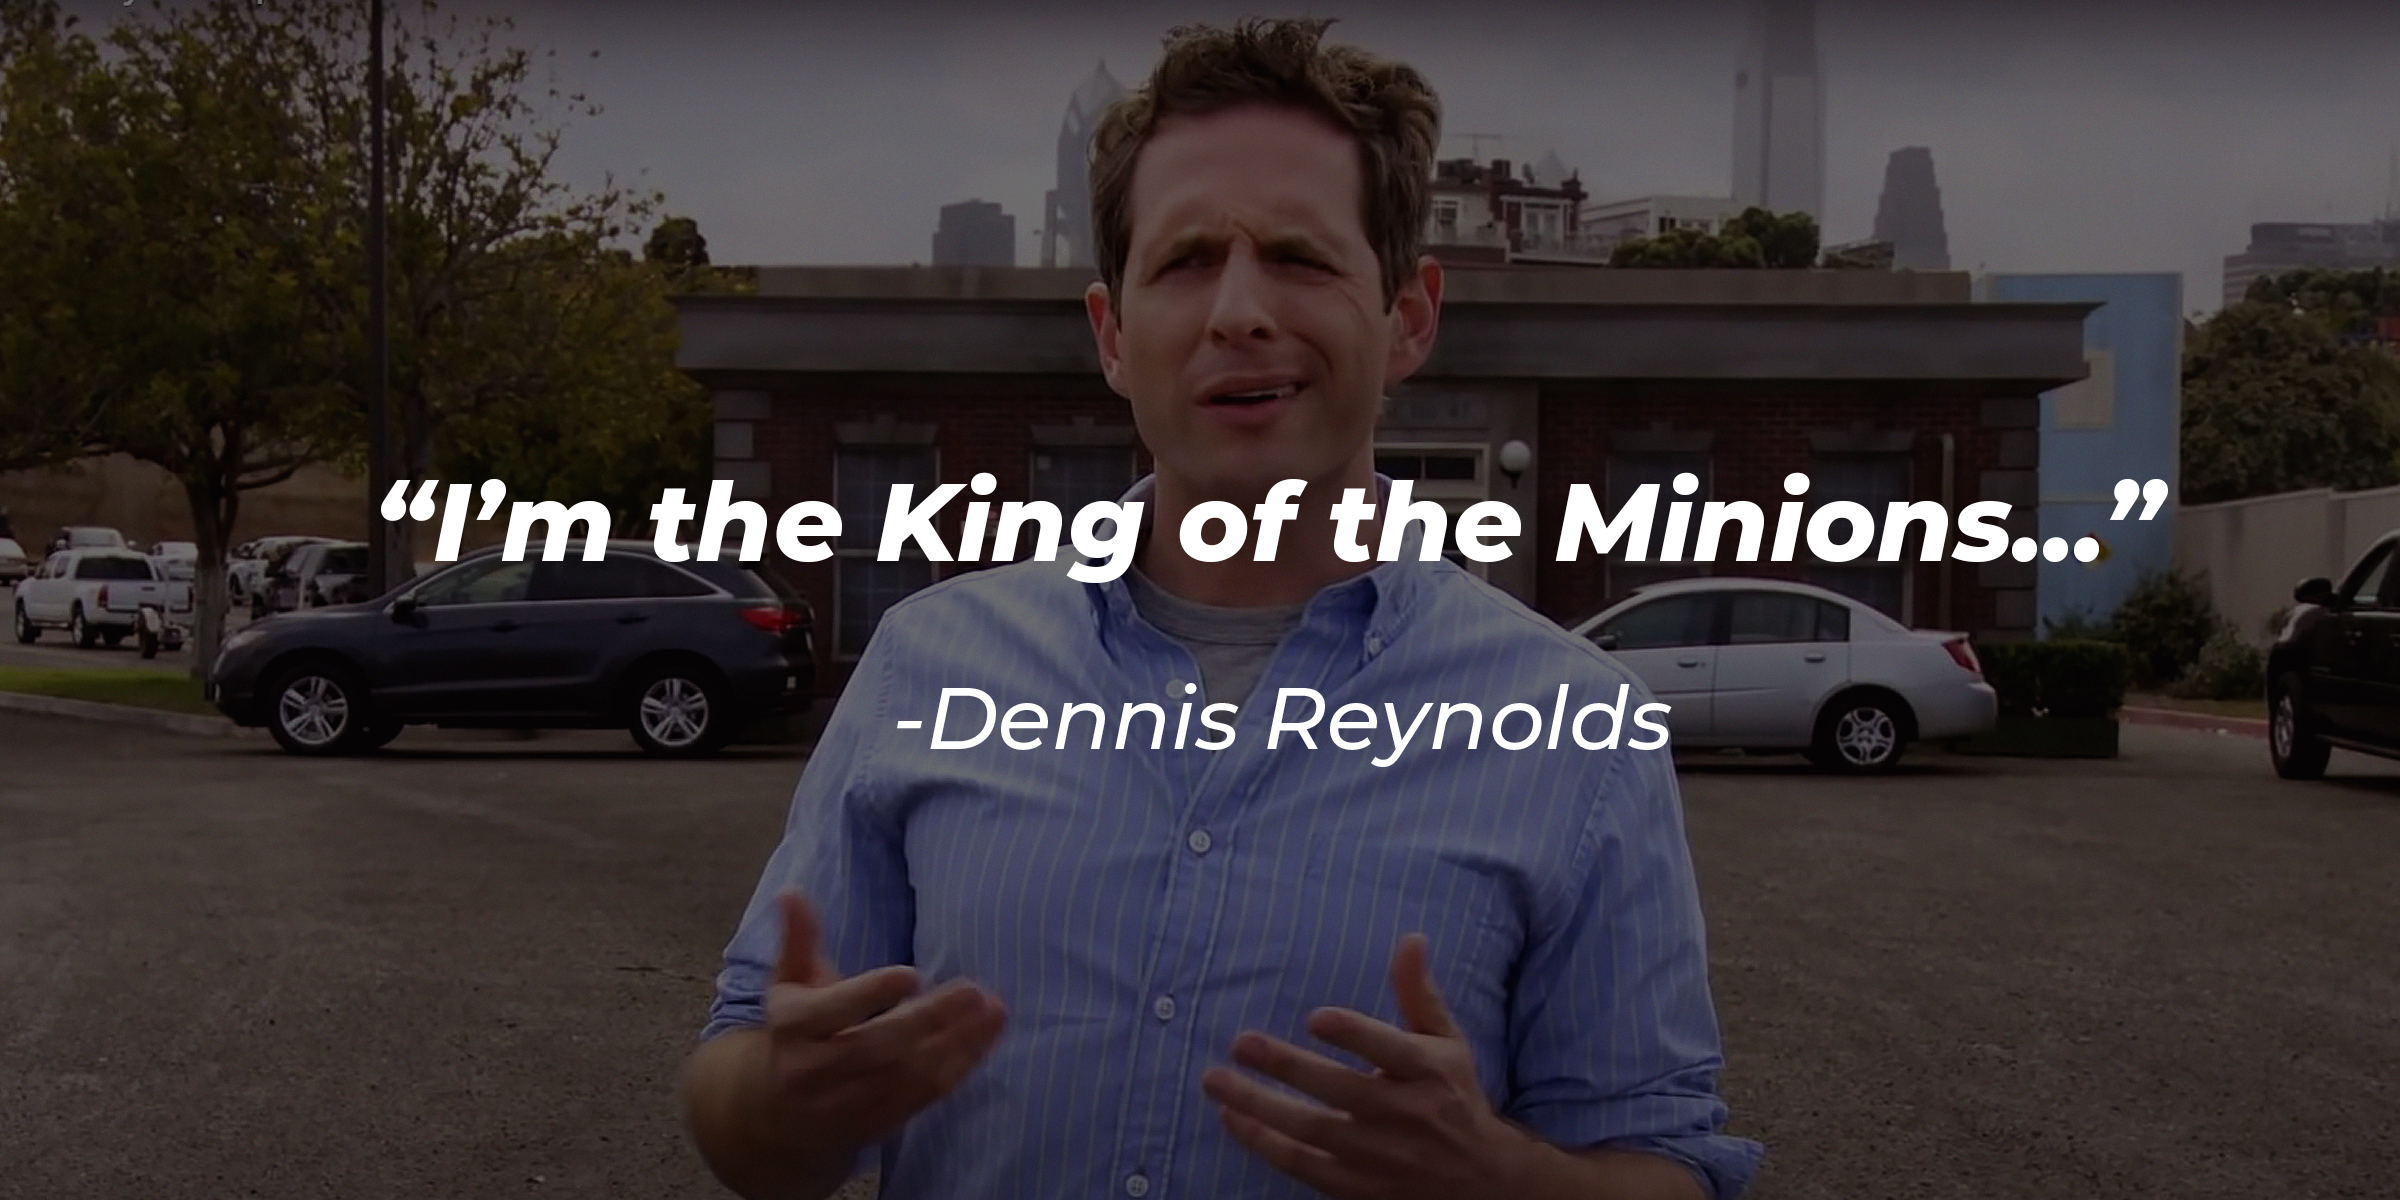 Dennis Reynolds' image with the quote: "I'm the King of the Minions..." | Source: facebook/It's Always Sunny in Philadelphia